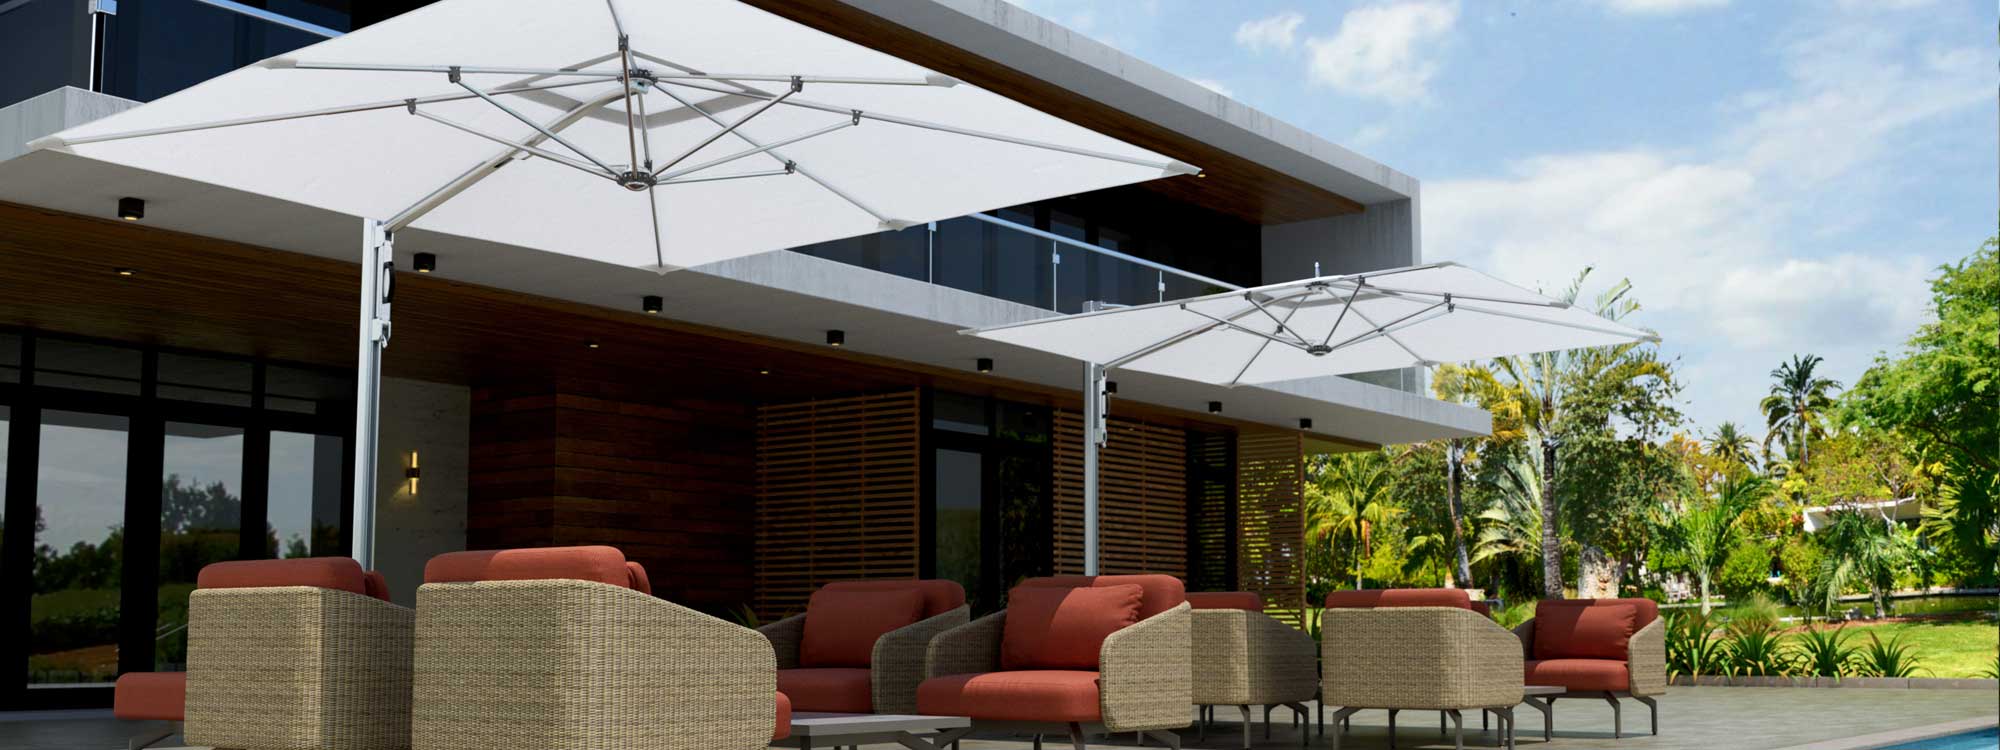 Image of white Tuuci Ocean Master cantilever parasols on hotel terrace above modern lounge furniture